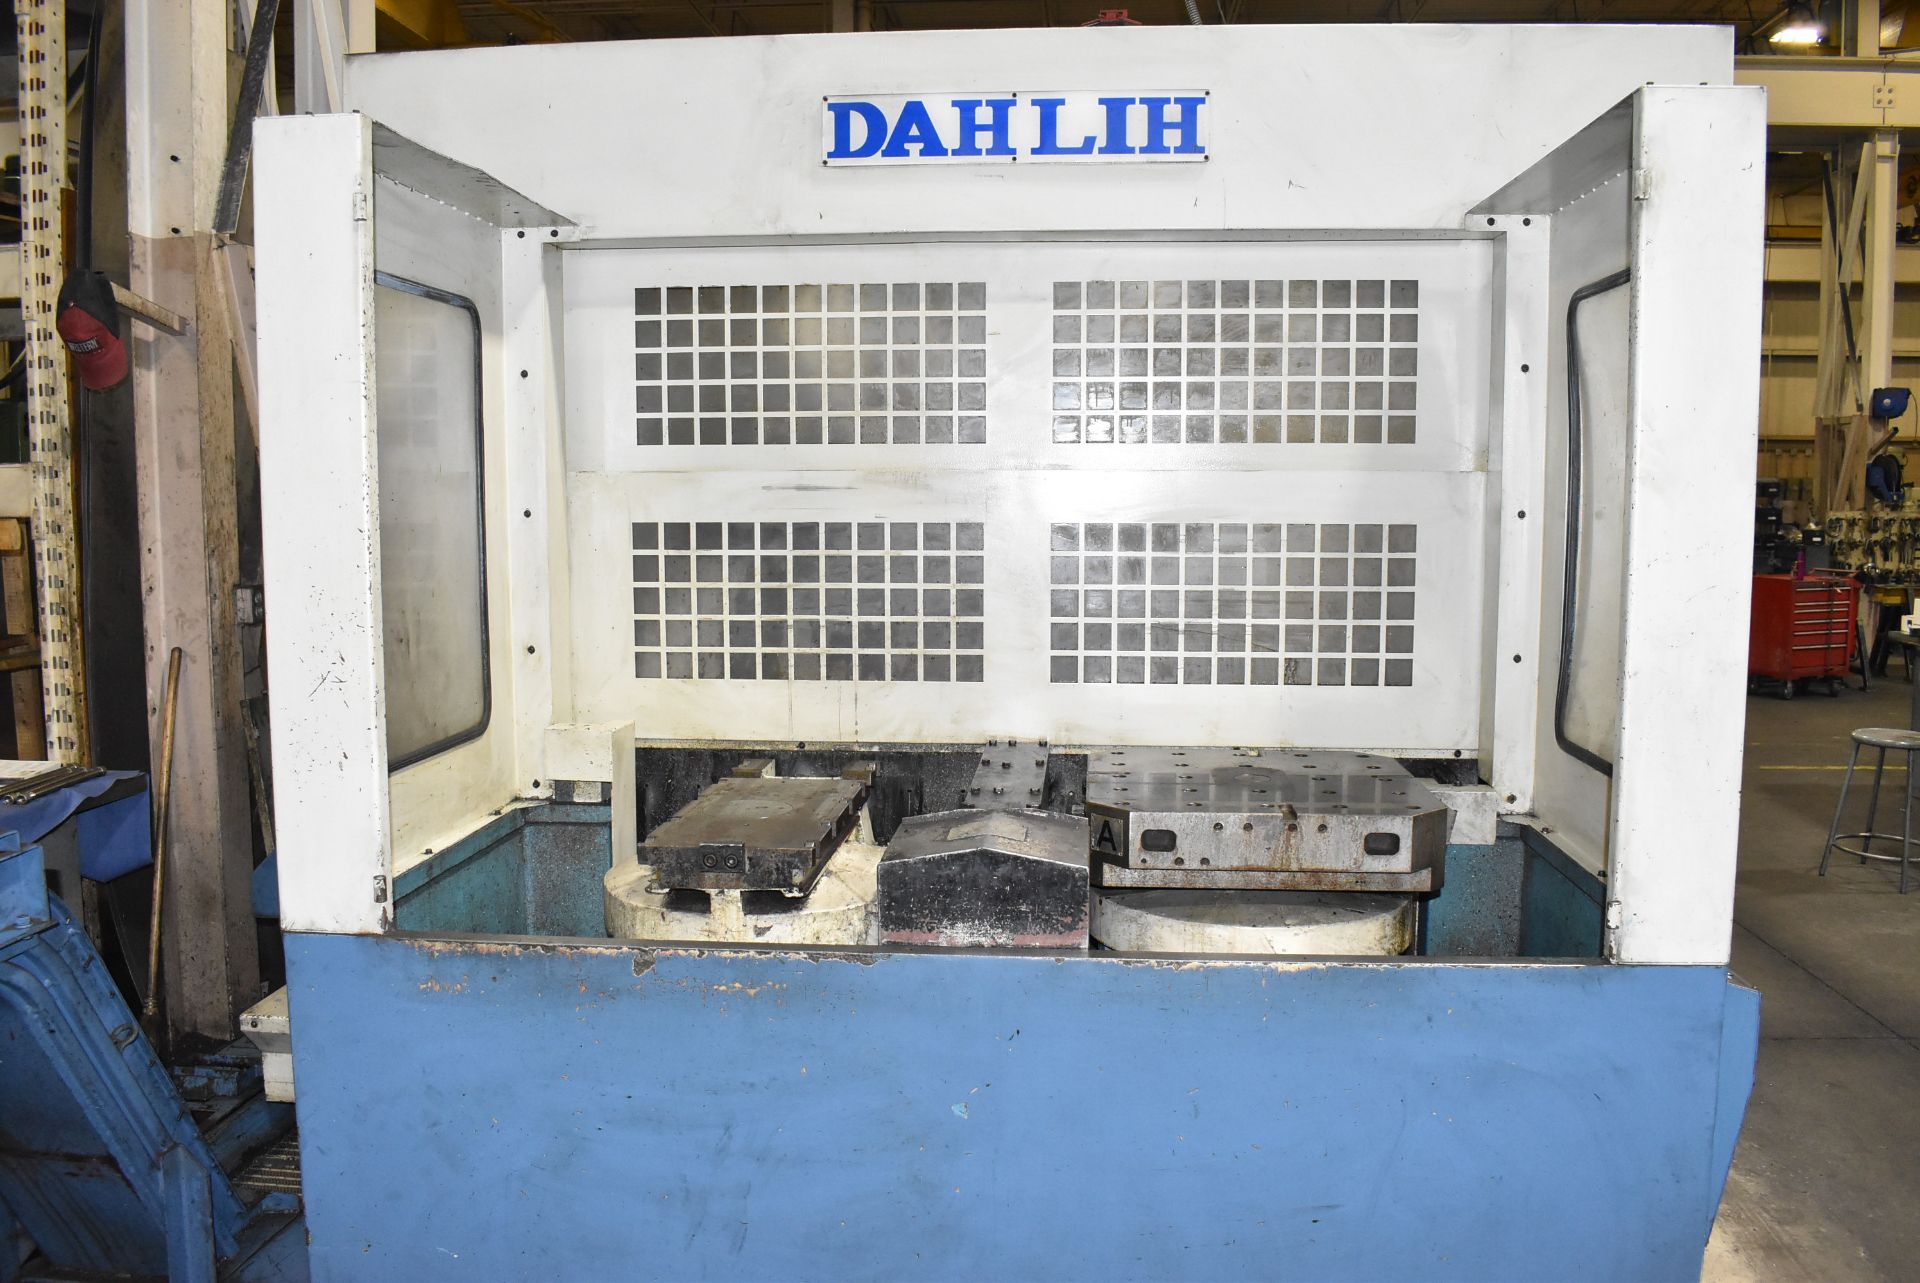 DAHLIH (2006) DL-MCH-500 TWIN PALLET CNC HORIZONTAL MACHINING CENTER WITH FANUC SERIES 21I-MB CNC - Image 2 of 9